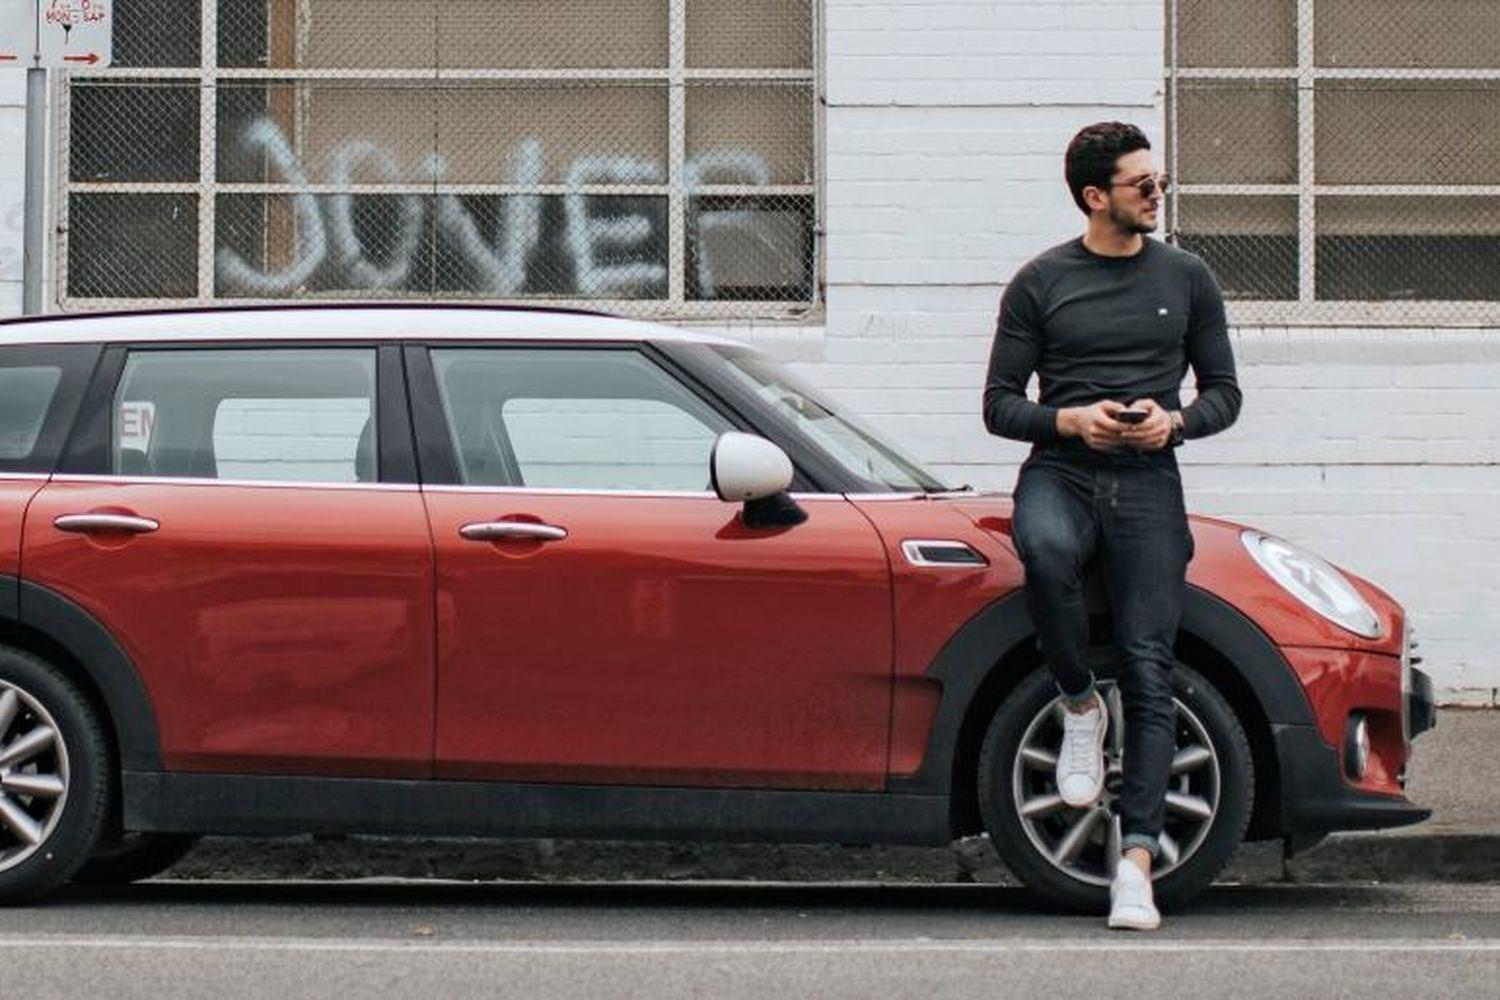 Person stands against front wheel of MINI 5-Door Hatchback while holding phone and looking away from the vehicle